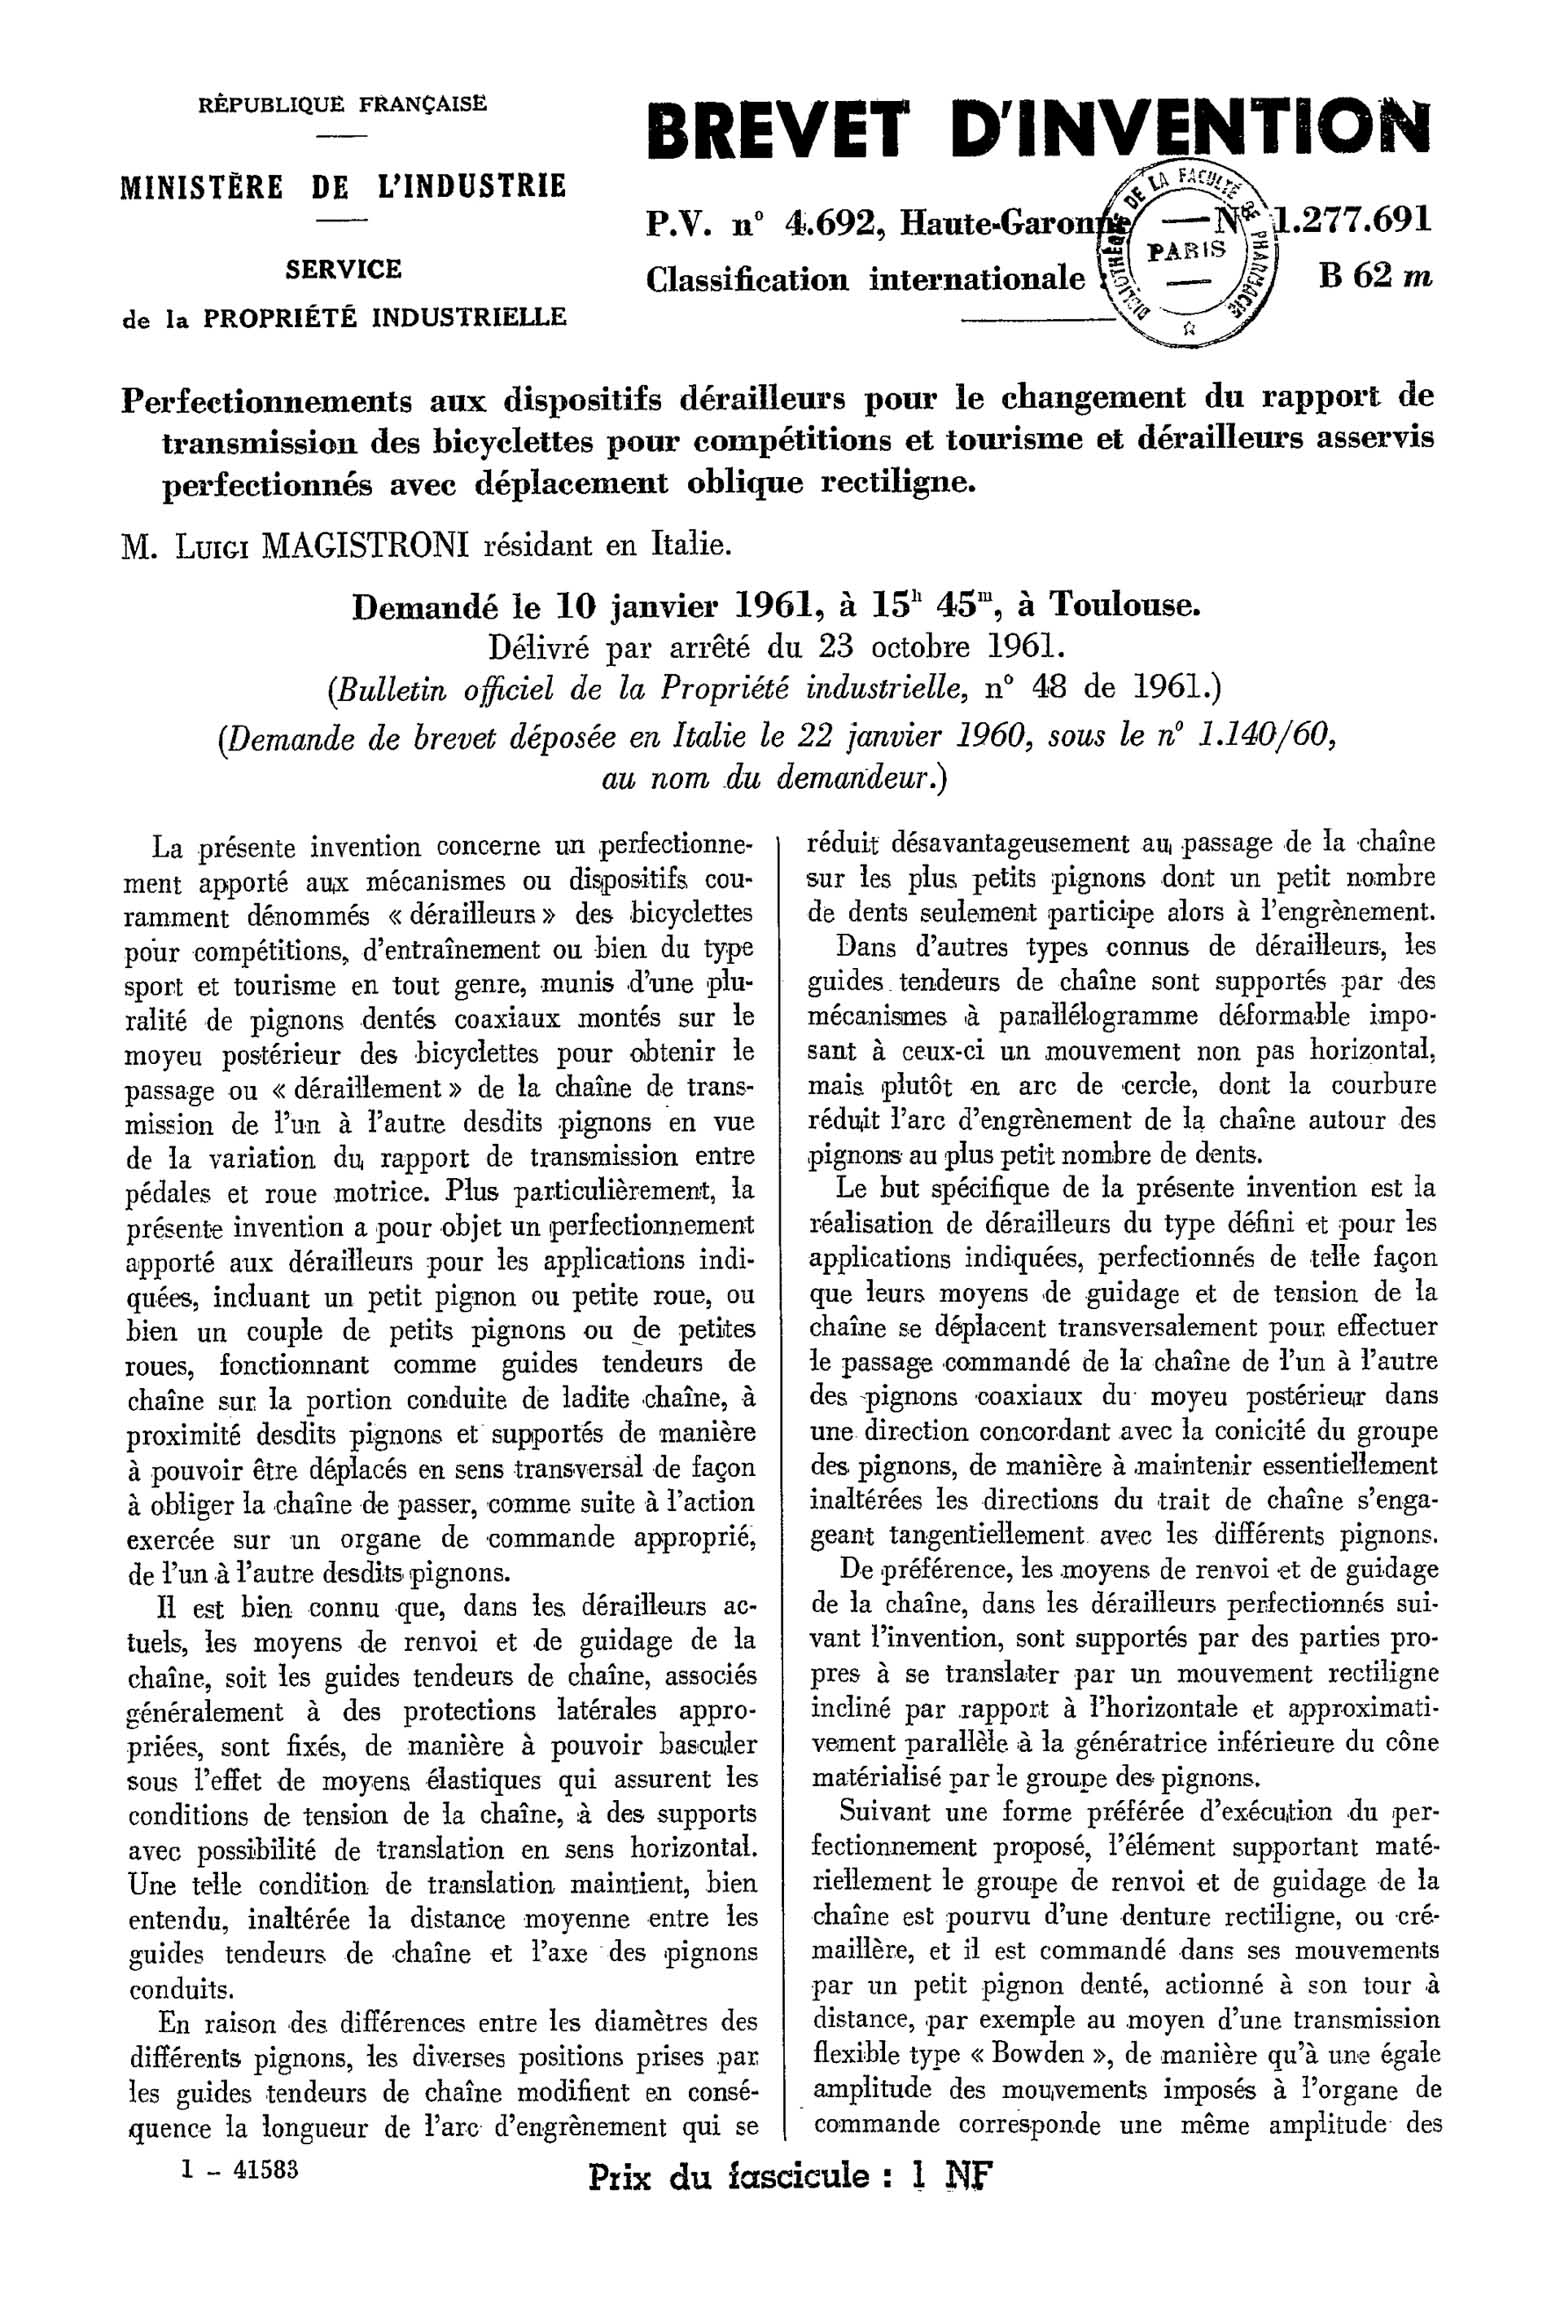 French Patent 1,277,691 - Magistroni scan 01 main image